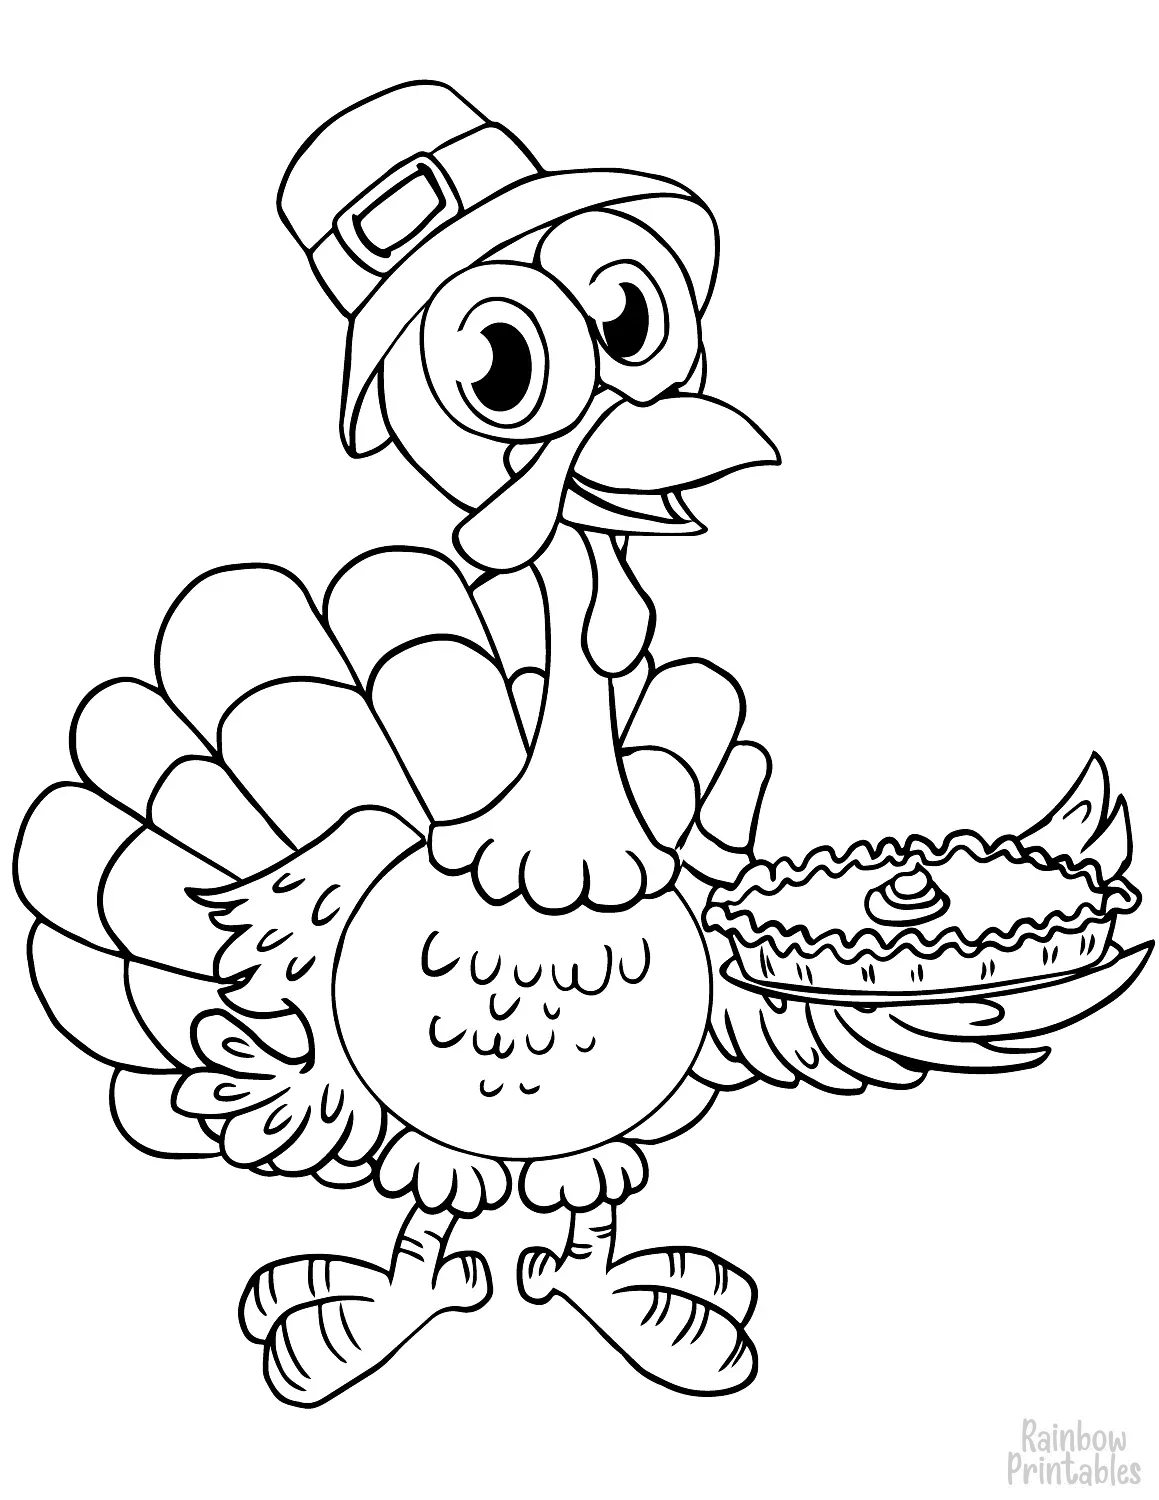 CUTE TURKEY WITH PUMPKIN PIE TURKEY FULL OF THANKSGIVING FOOD BUFFET CORN PIE STUFFED Clipart Coloring Pages for Kids Adults Art Activities Line Art